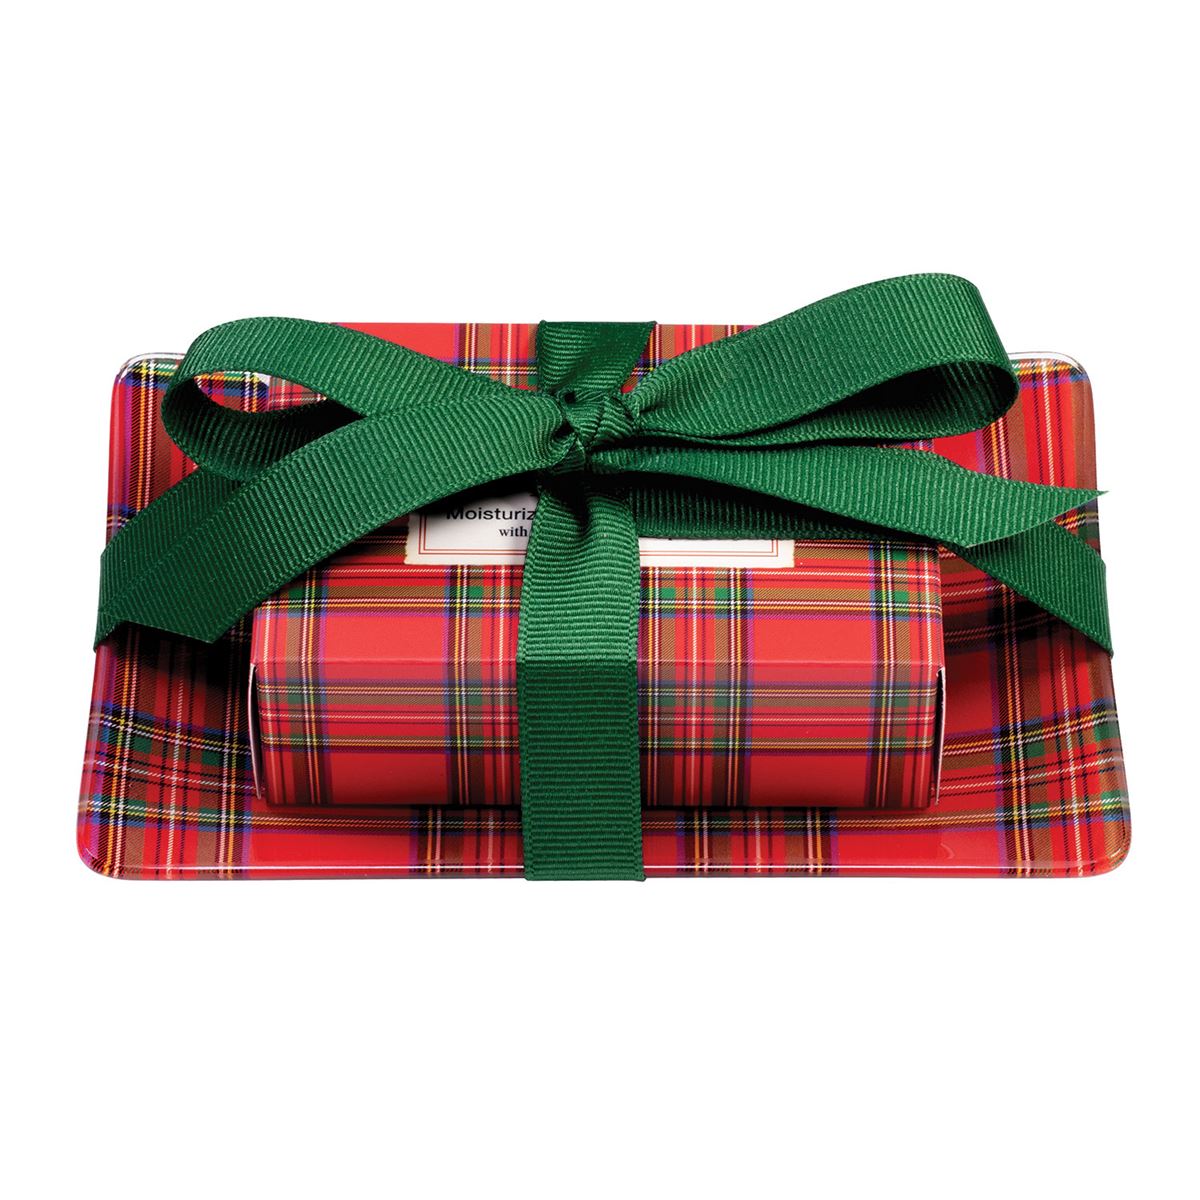 All tied up with a bow and ready to go! Our sweet gift set features a Boxed Single Soap and coordinating Glass Soap Dish fastened together with a grosgrain ribbon. No wrapping required! Soap made in England.  DETAILS: Soap Weight: e 4.5 oz. / 127 g. Rectangular Glass Soap Dish Size: 5.75 x 3.75 x .5" / 14.6 x 9.5 x 1.3 cm.  SCENT: Winter pine and snow with notes of moss and amber